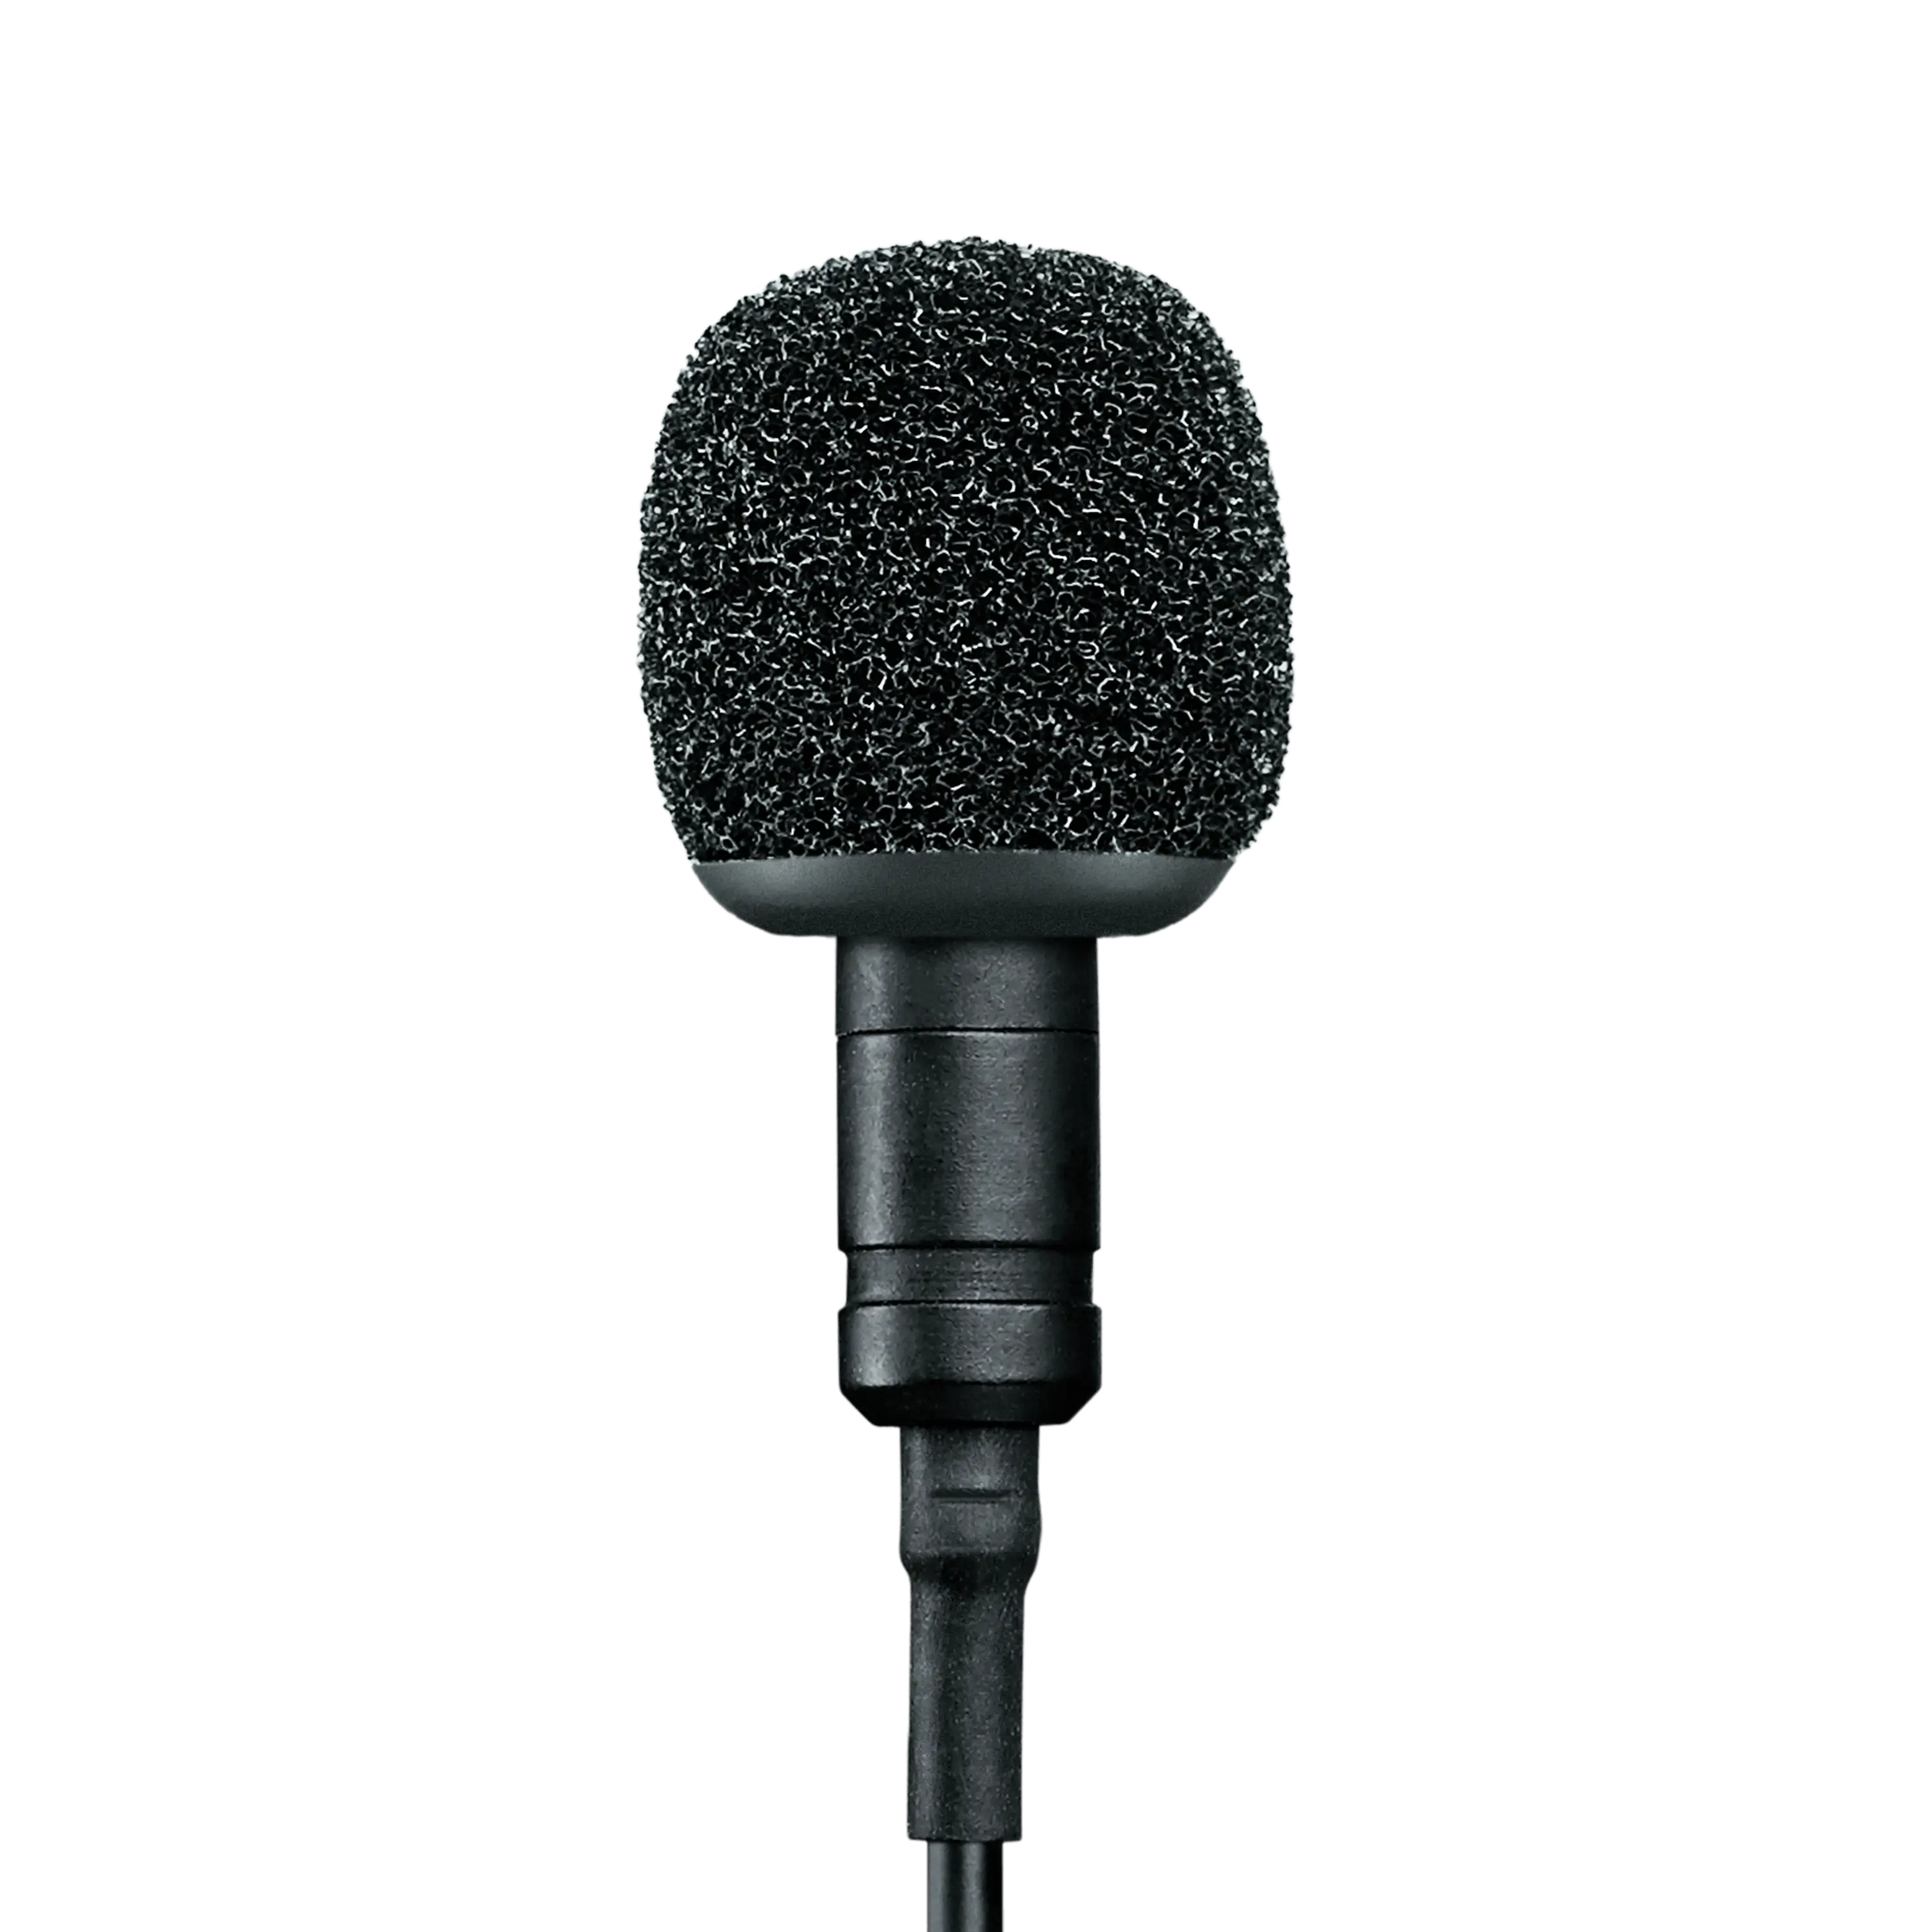 How To Use a Professional XLR Microphone with a Smartphone or